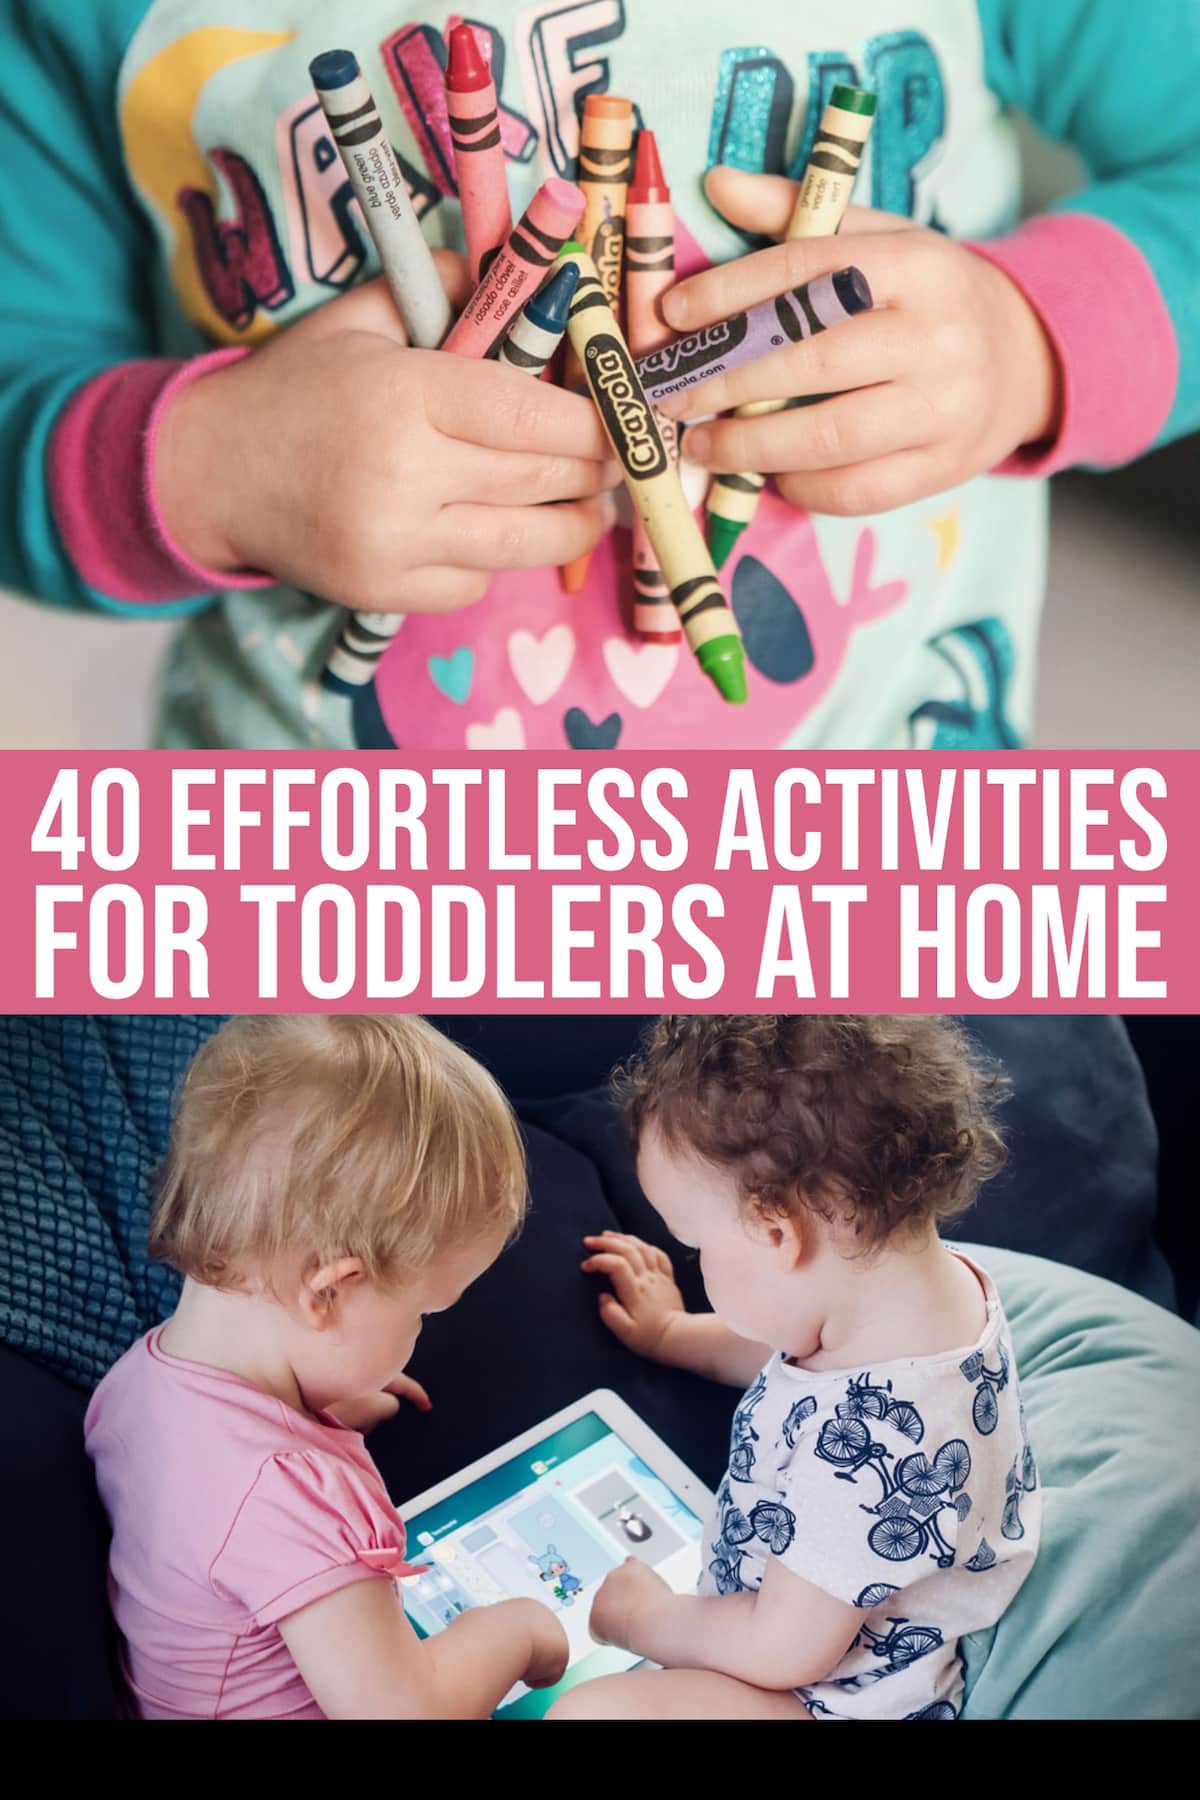 40 Effortless Activities For Toddlers At Home